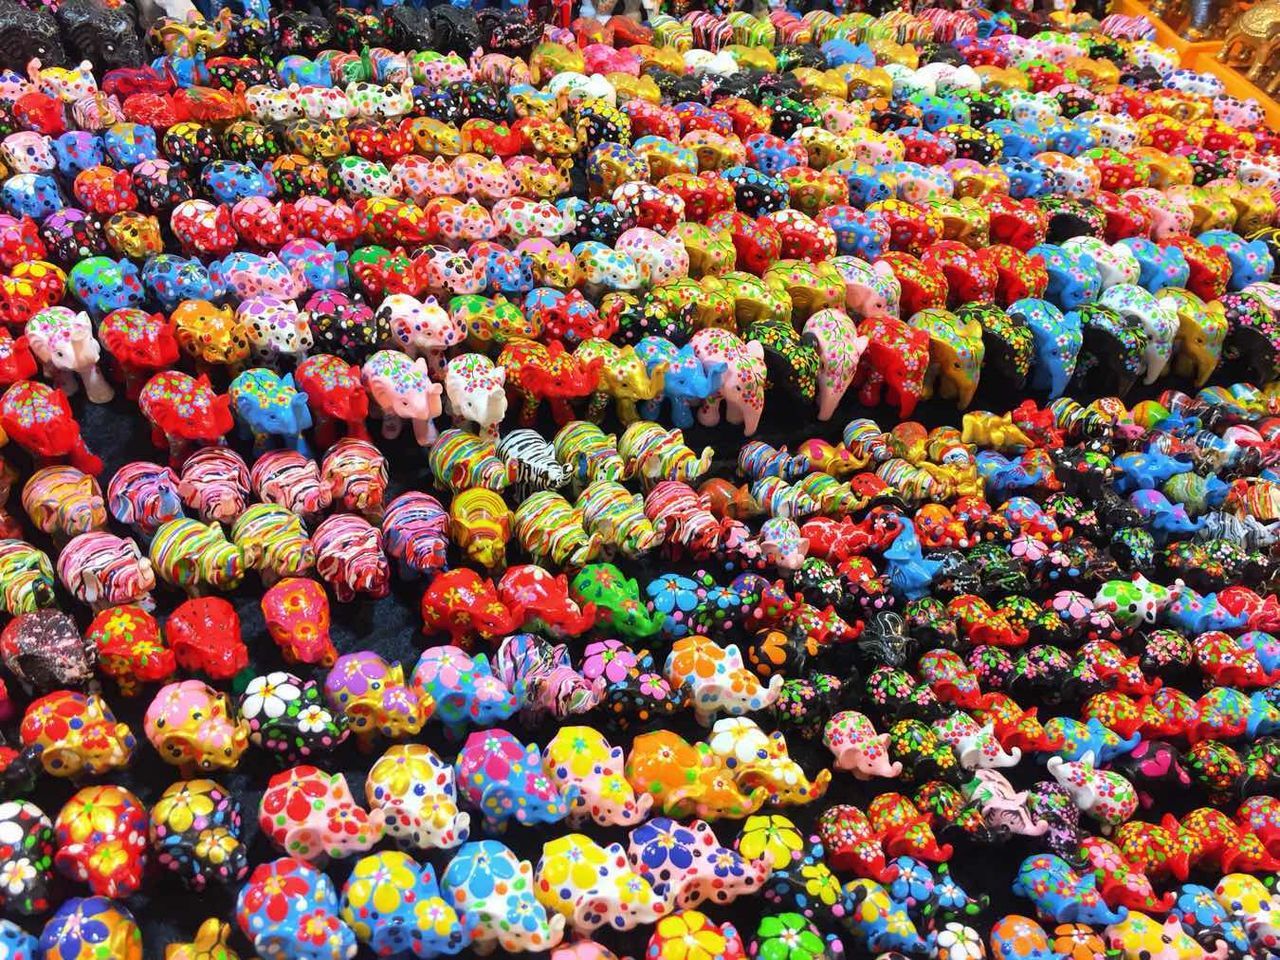 FULL FRAME SHOT OF MULTI COLORED CANDIES AT MARKET